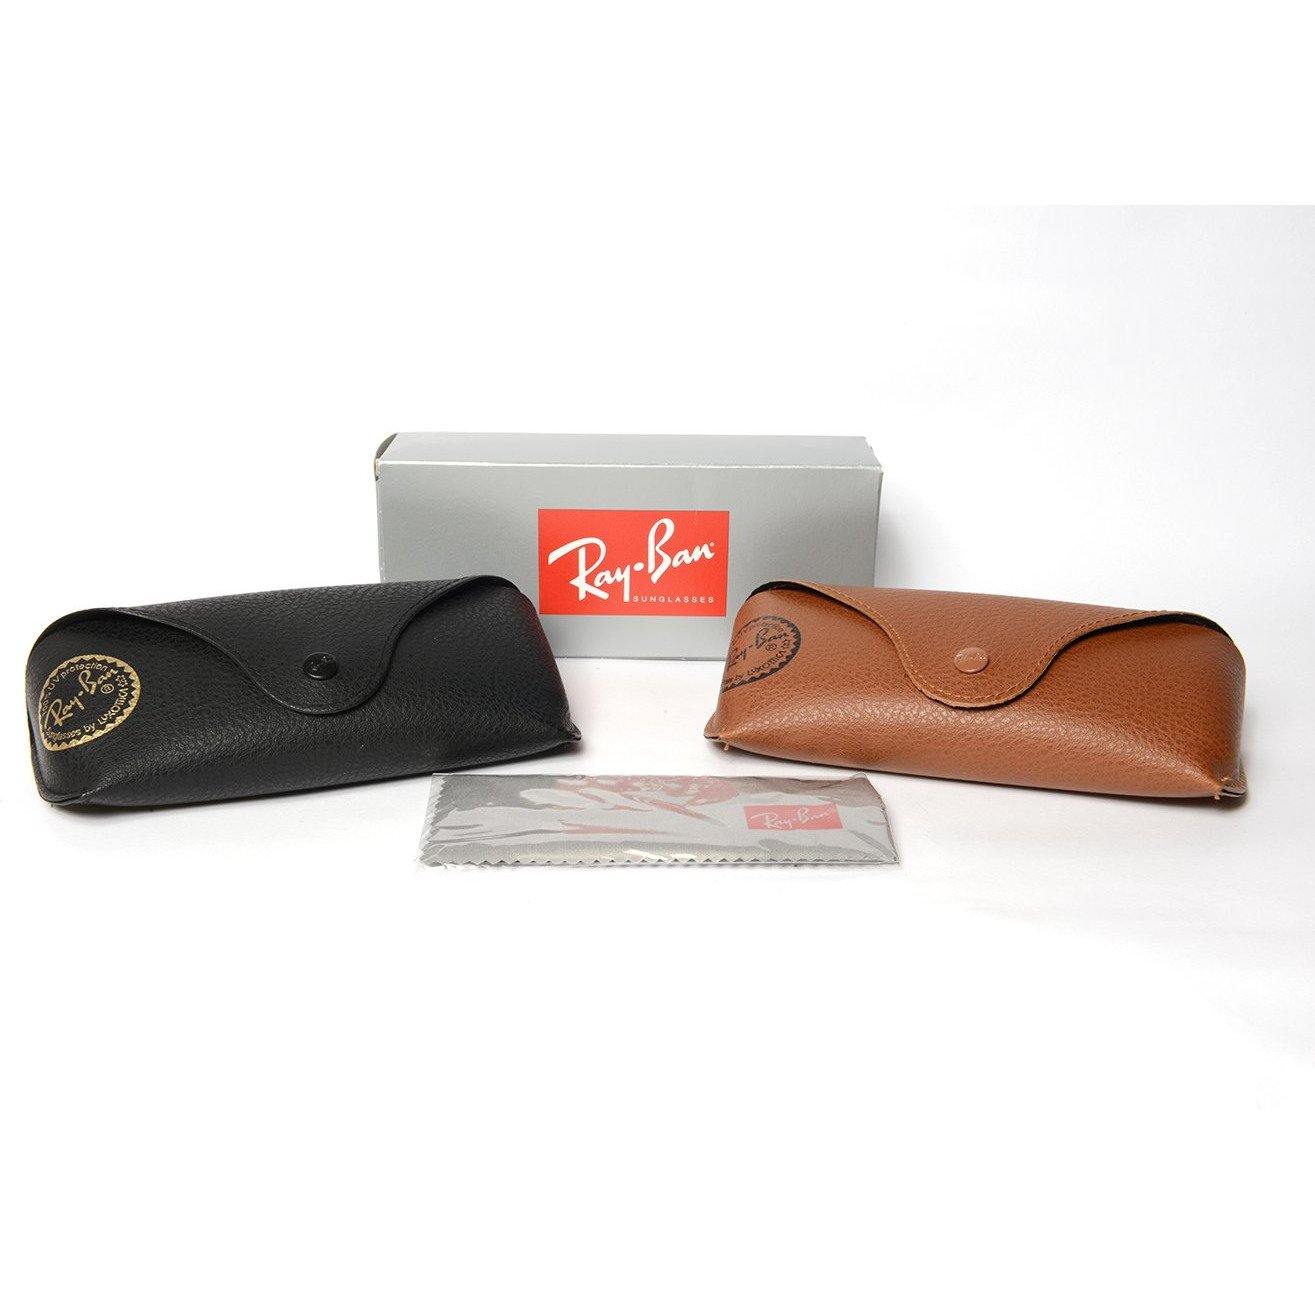 ray ban clamshell case